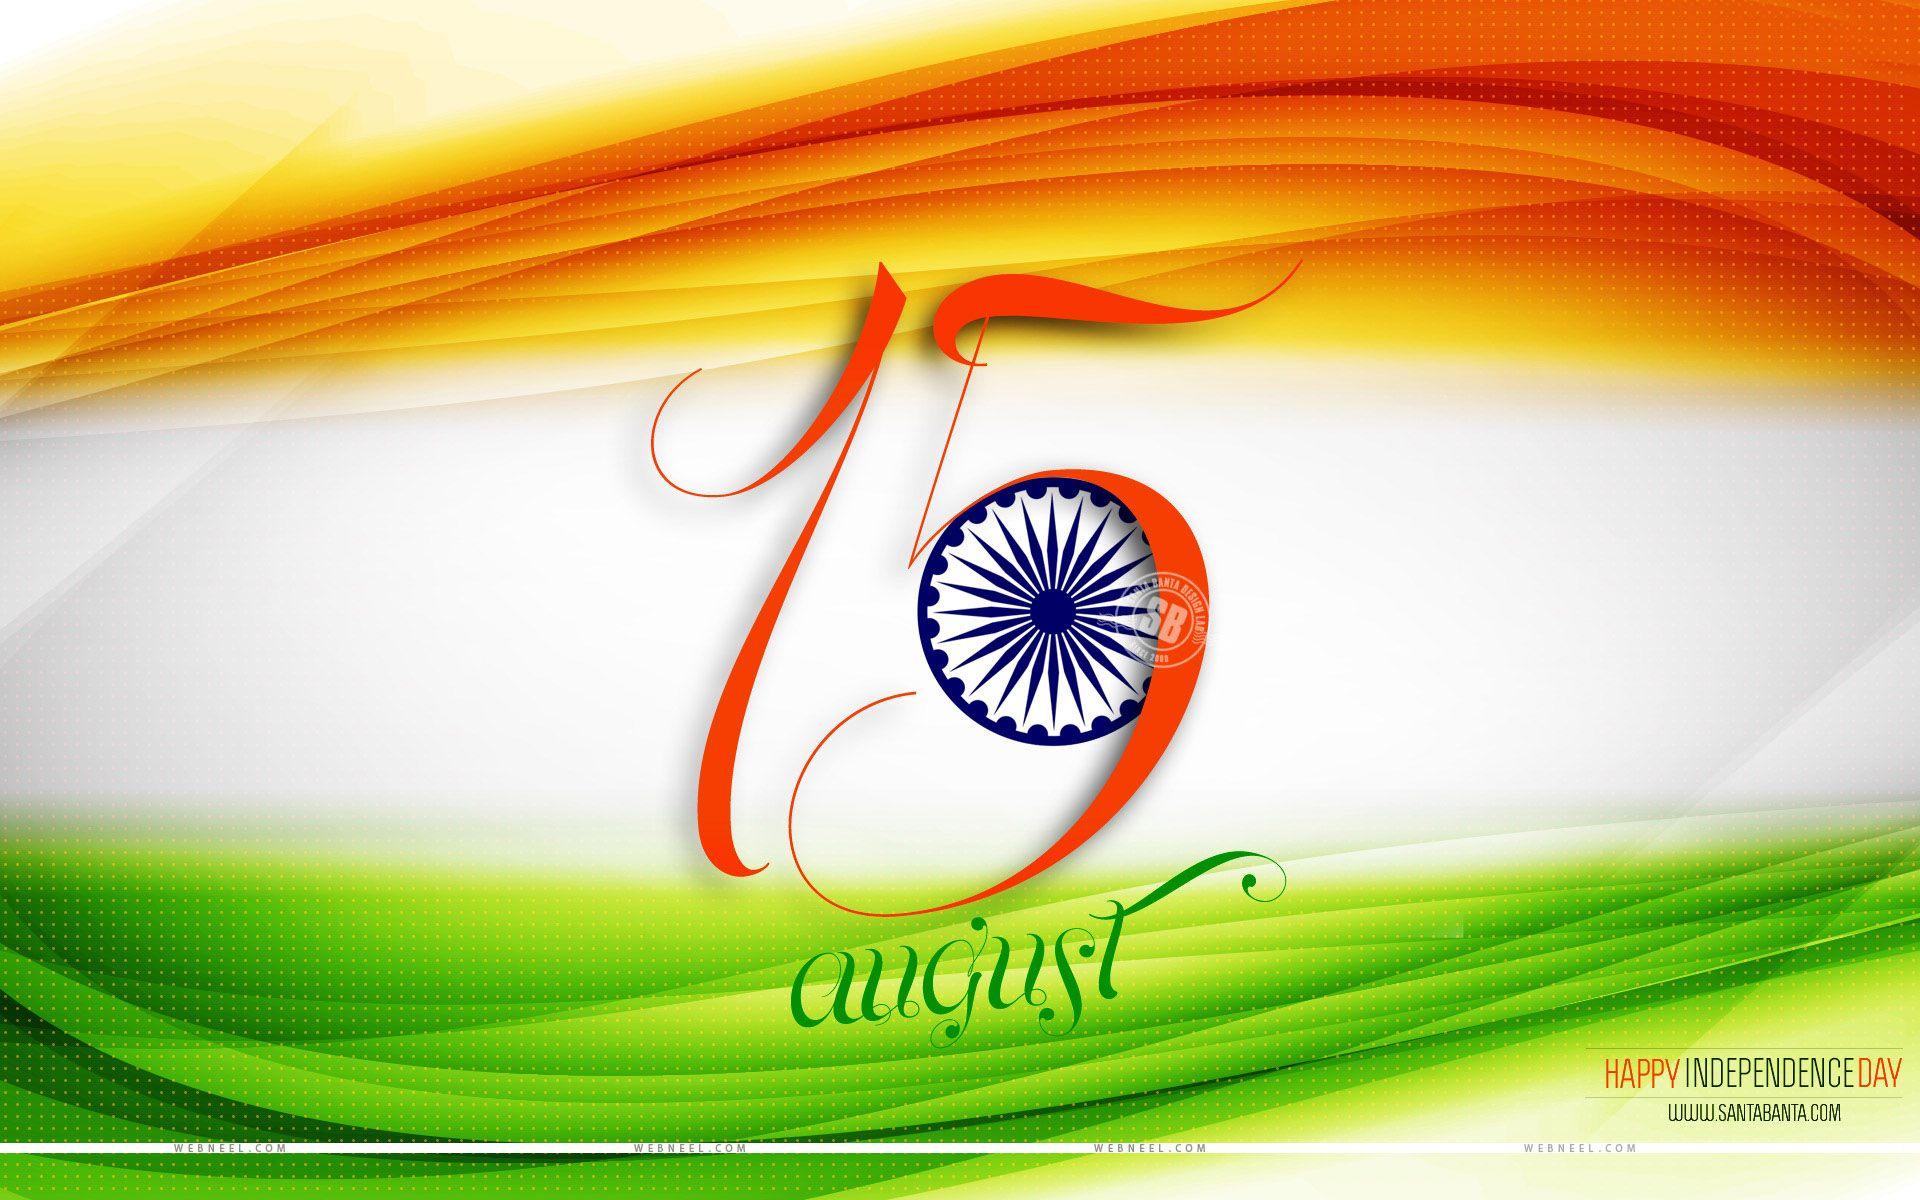  15 August Editing background HD  Tiranga Independence day 2 Free  Download